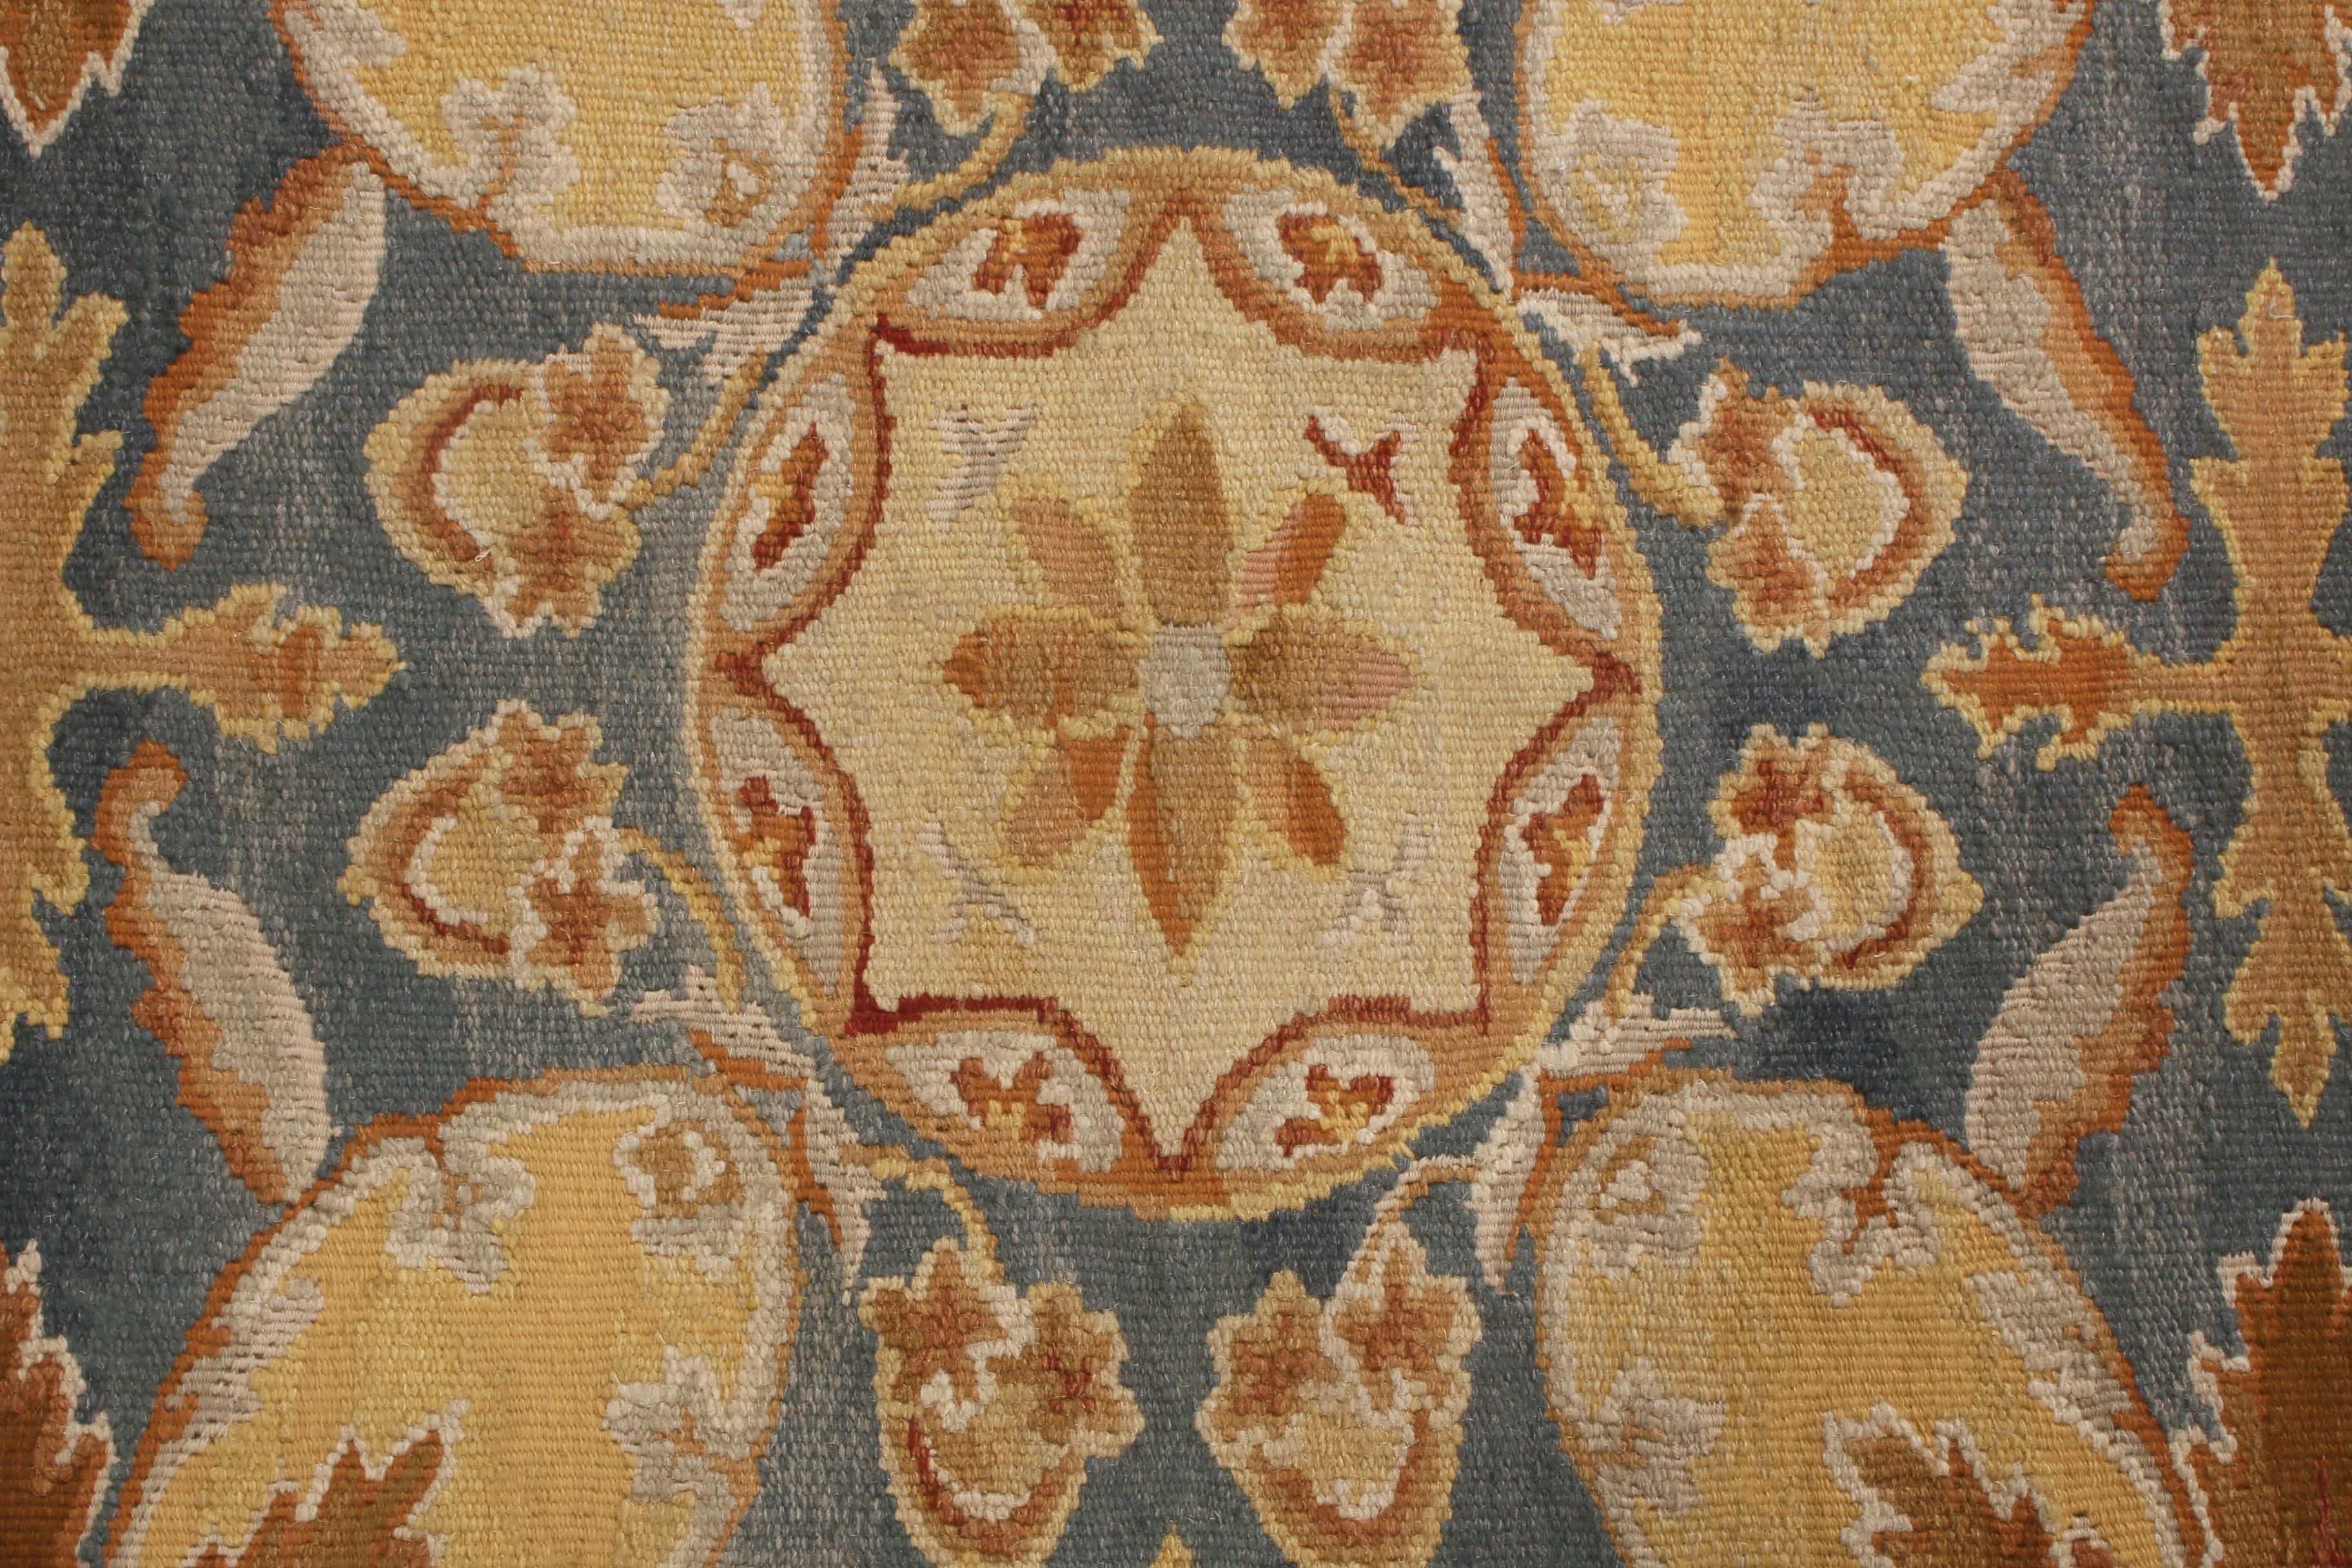 Originating from China, this new transitional wool rug employs an homage to 18th century Aubusson style in an all-over field design with distinct modern colorways. Hand knotted in high-quality wool, the multi-tonal shading of the rippling floral